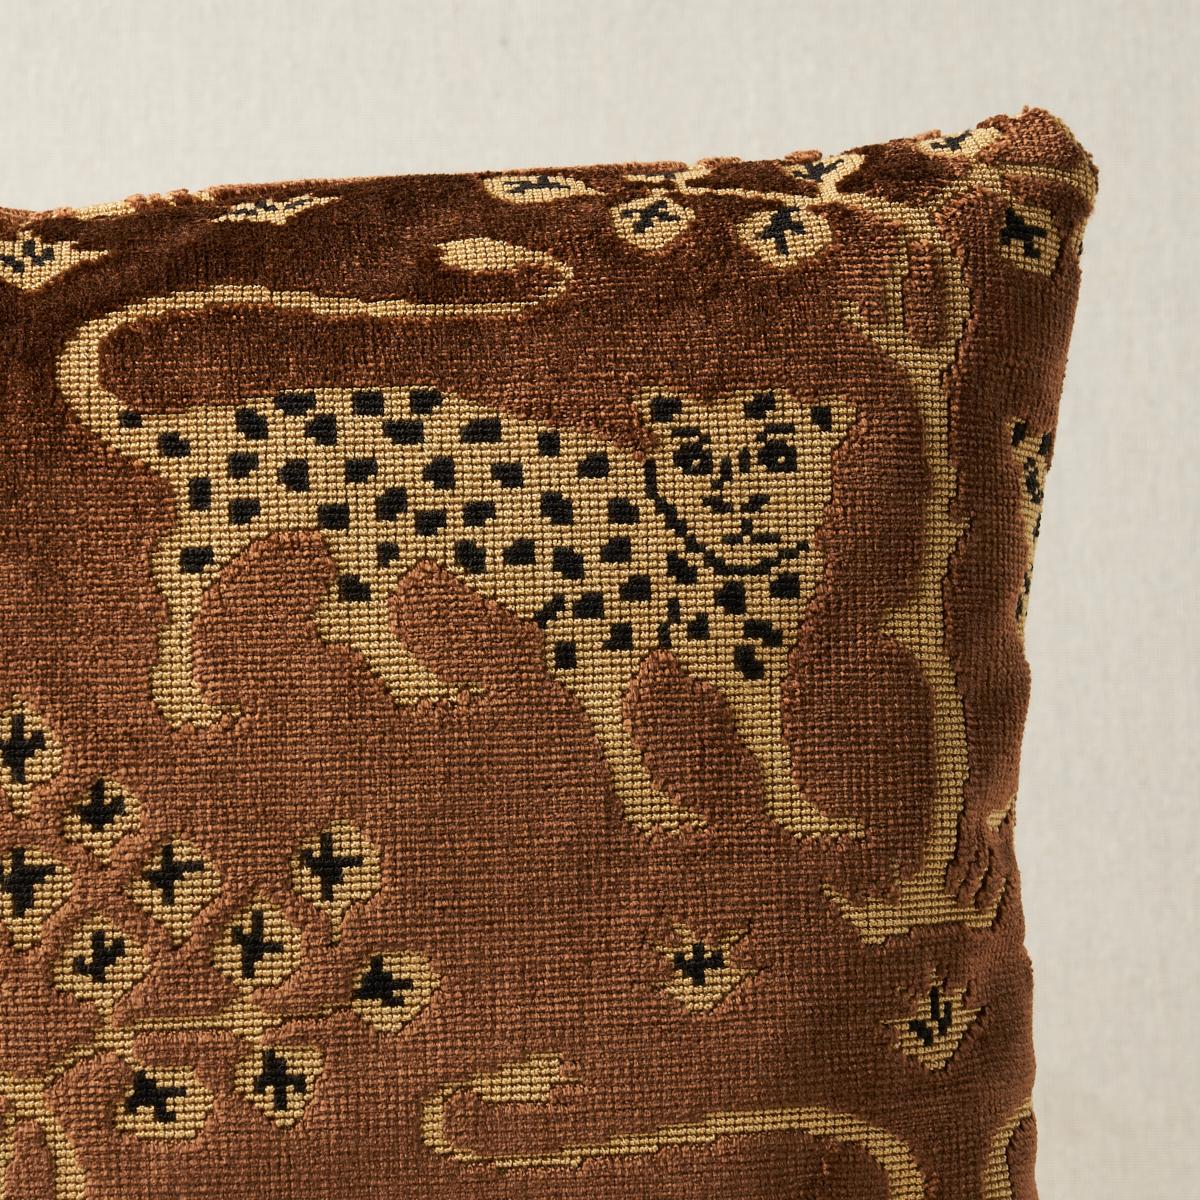 This pillow features Woodland Leopard Velvet with a knife edge finish. A host of historic paintings and textiles served as source material for this fabulously stylized leopard and tree motif. The midscale mirrored repeat design combines loop-and-cut